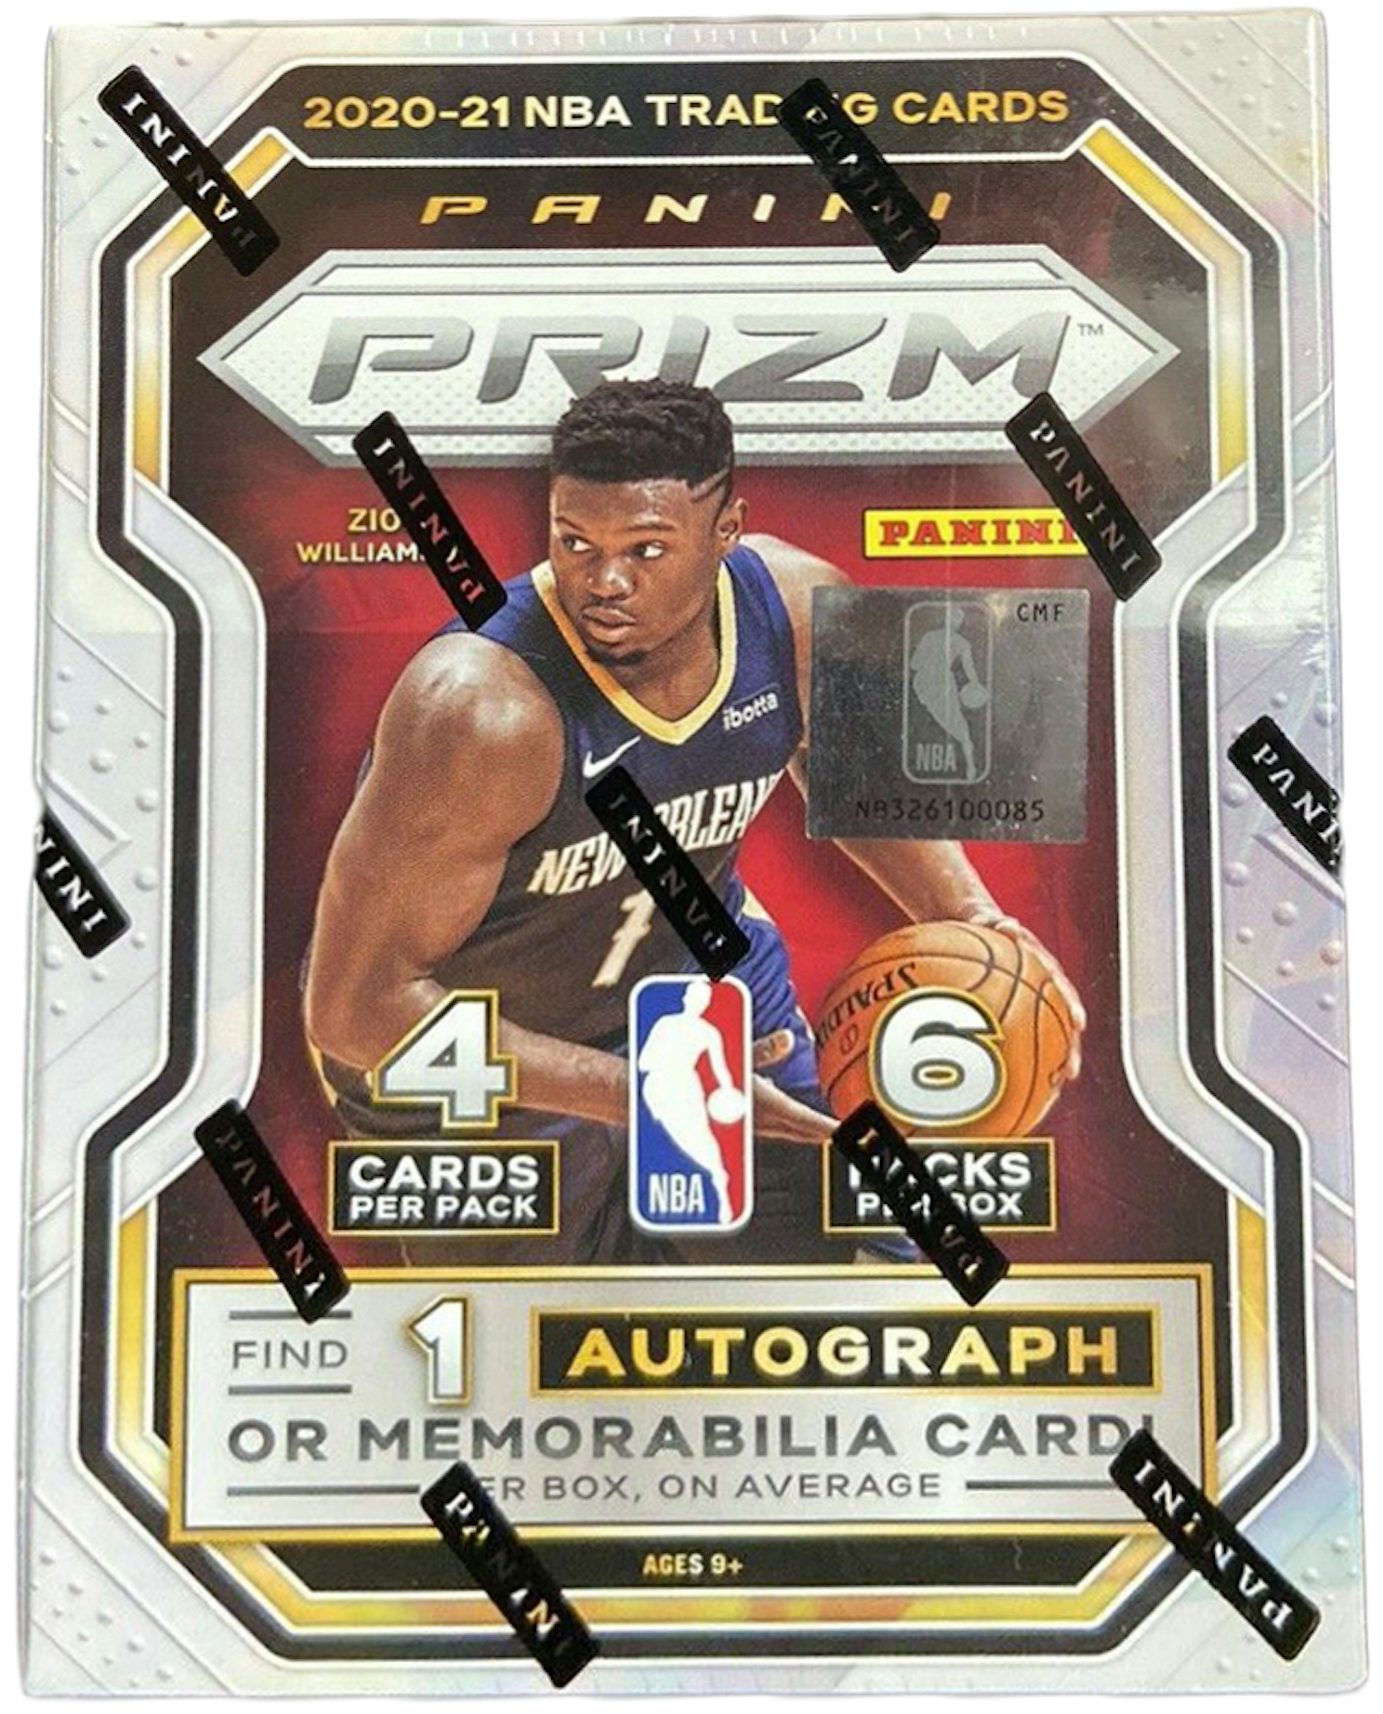 Topps NBA Basketball Card Collector Box with Over 500 Cards - Grab